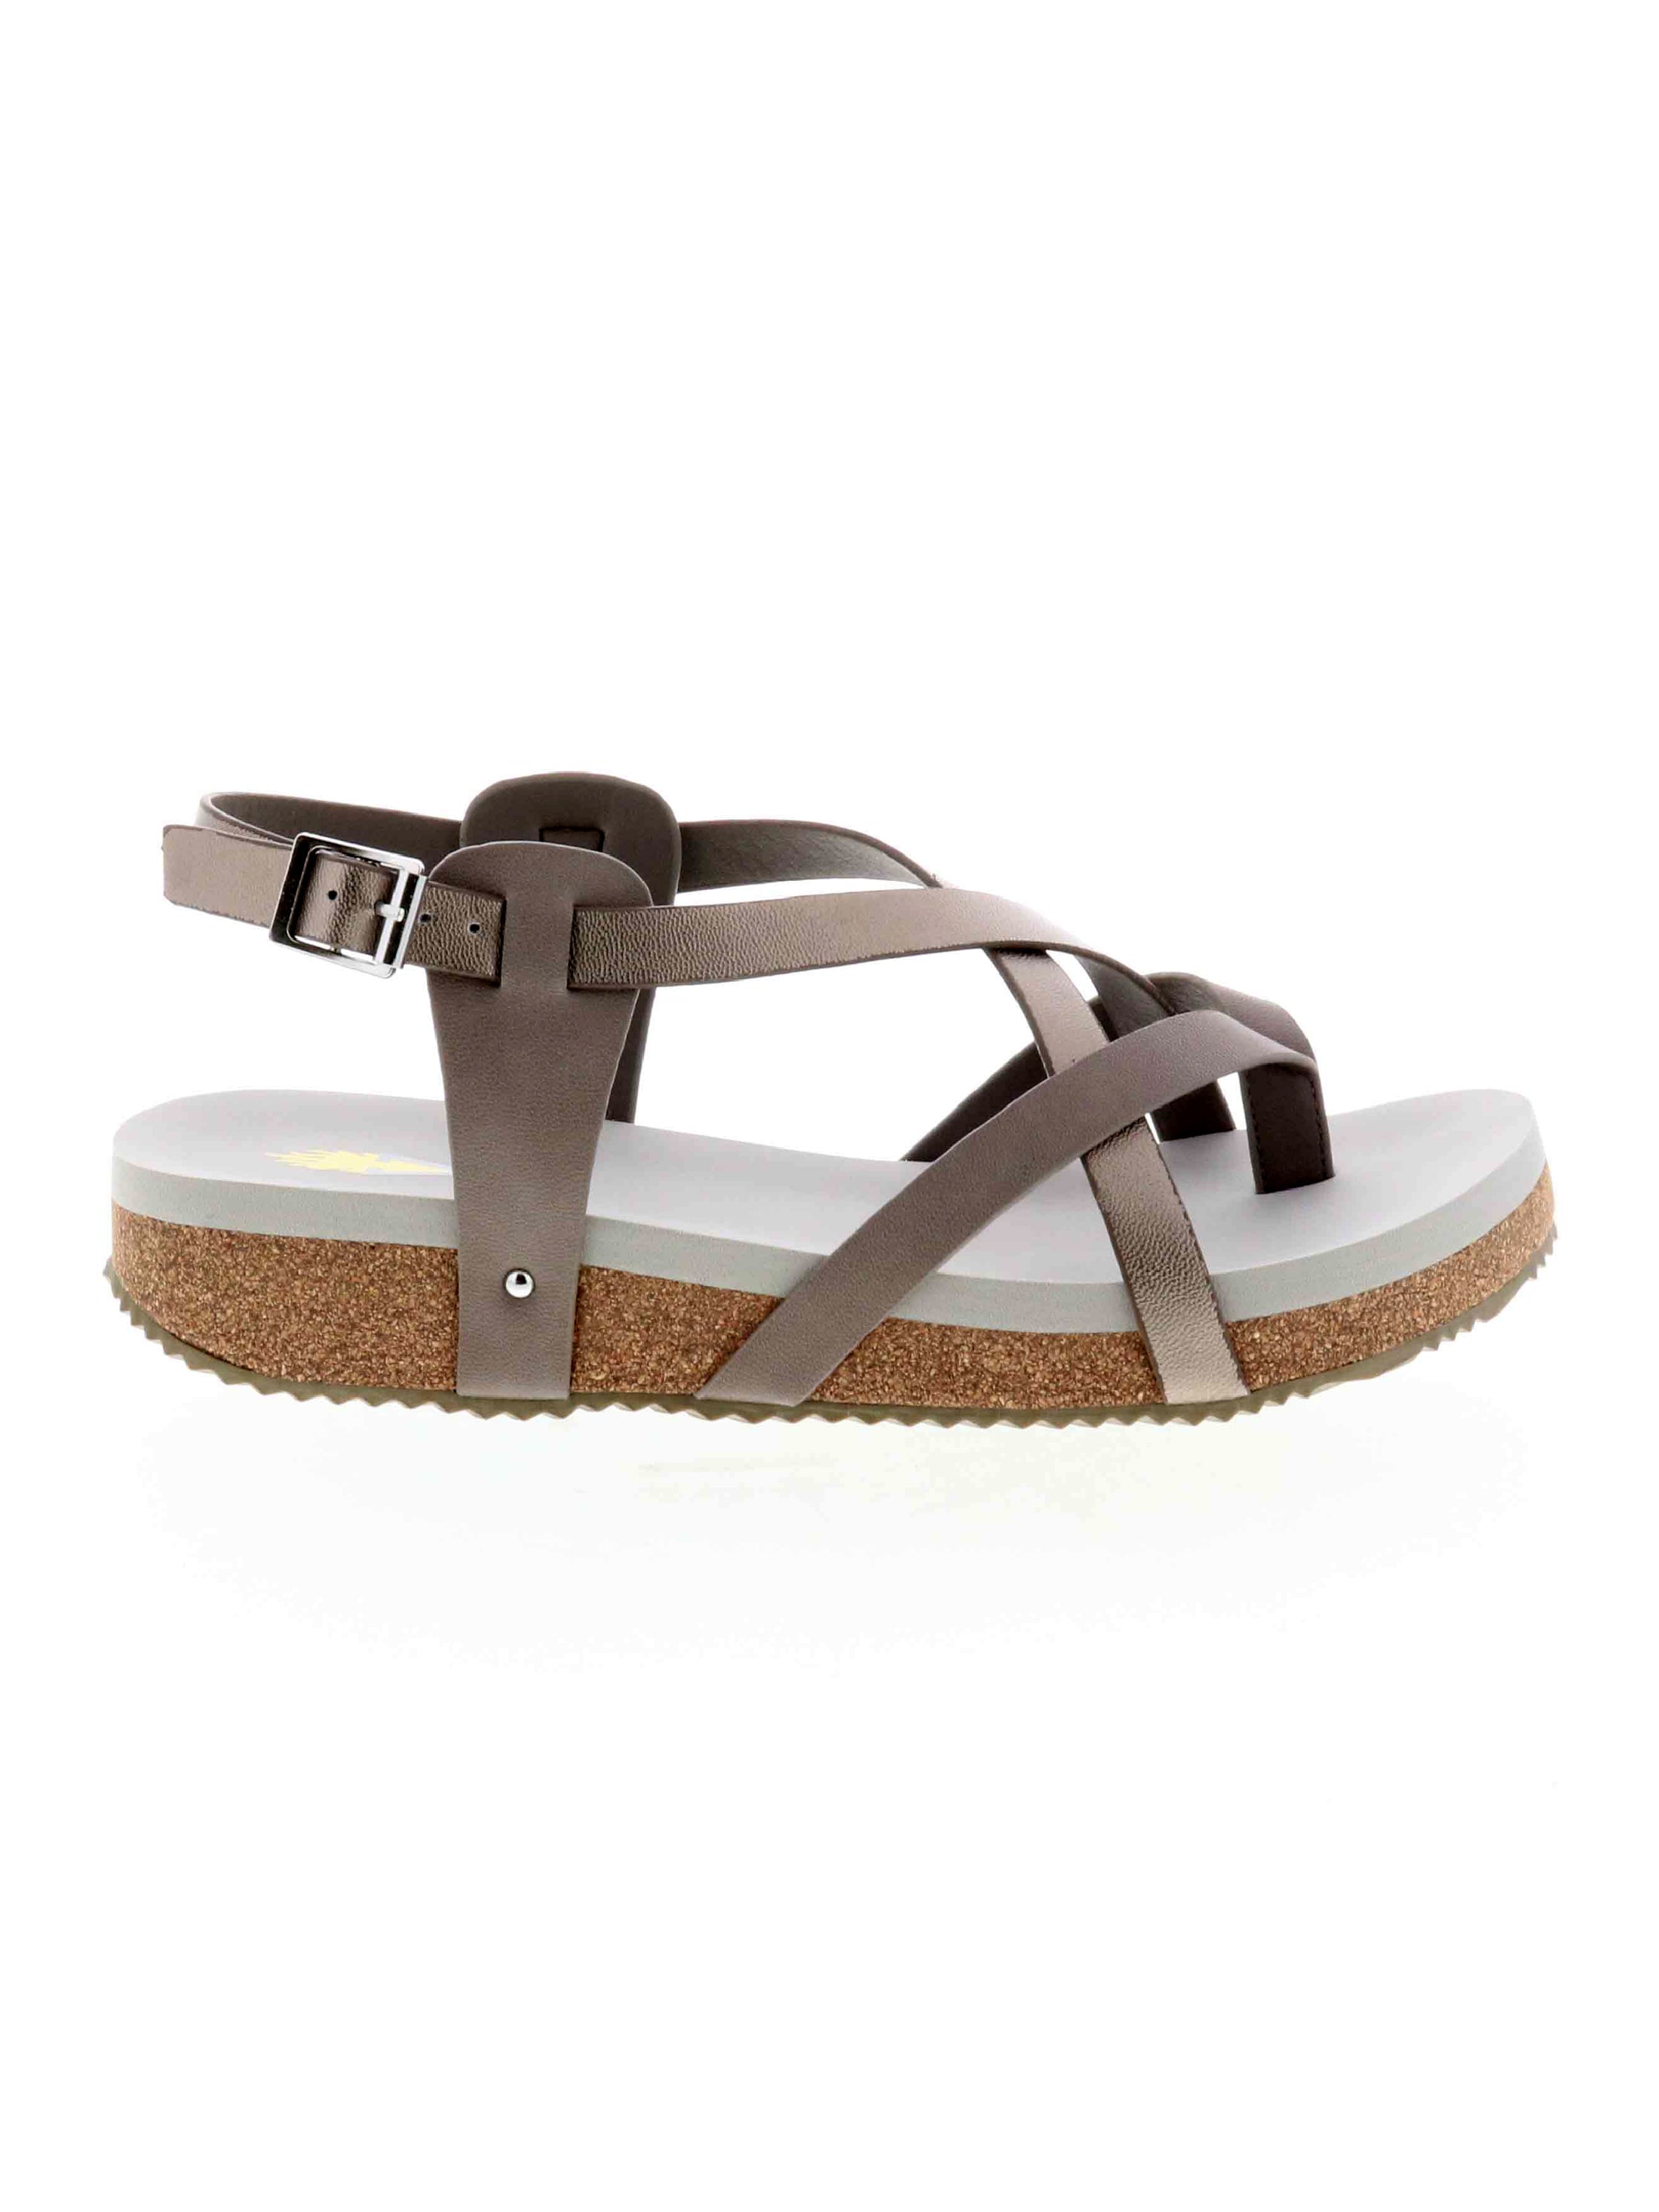 TIMBERLAND: Chicago Riverside Thong Sandals | The Whitby Cobbler